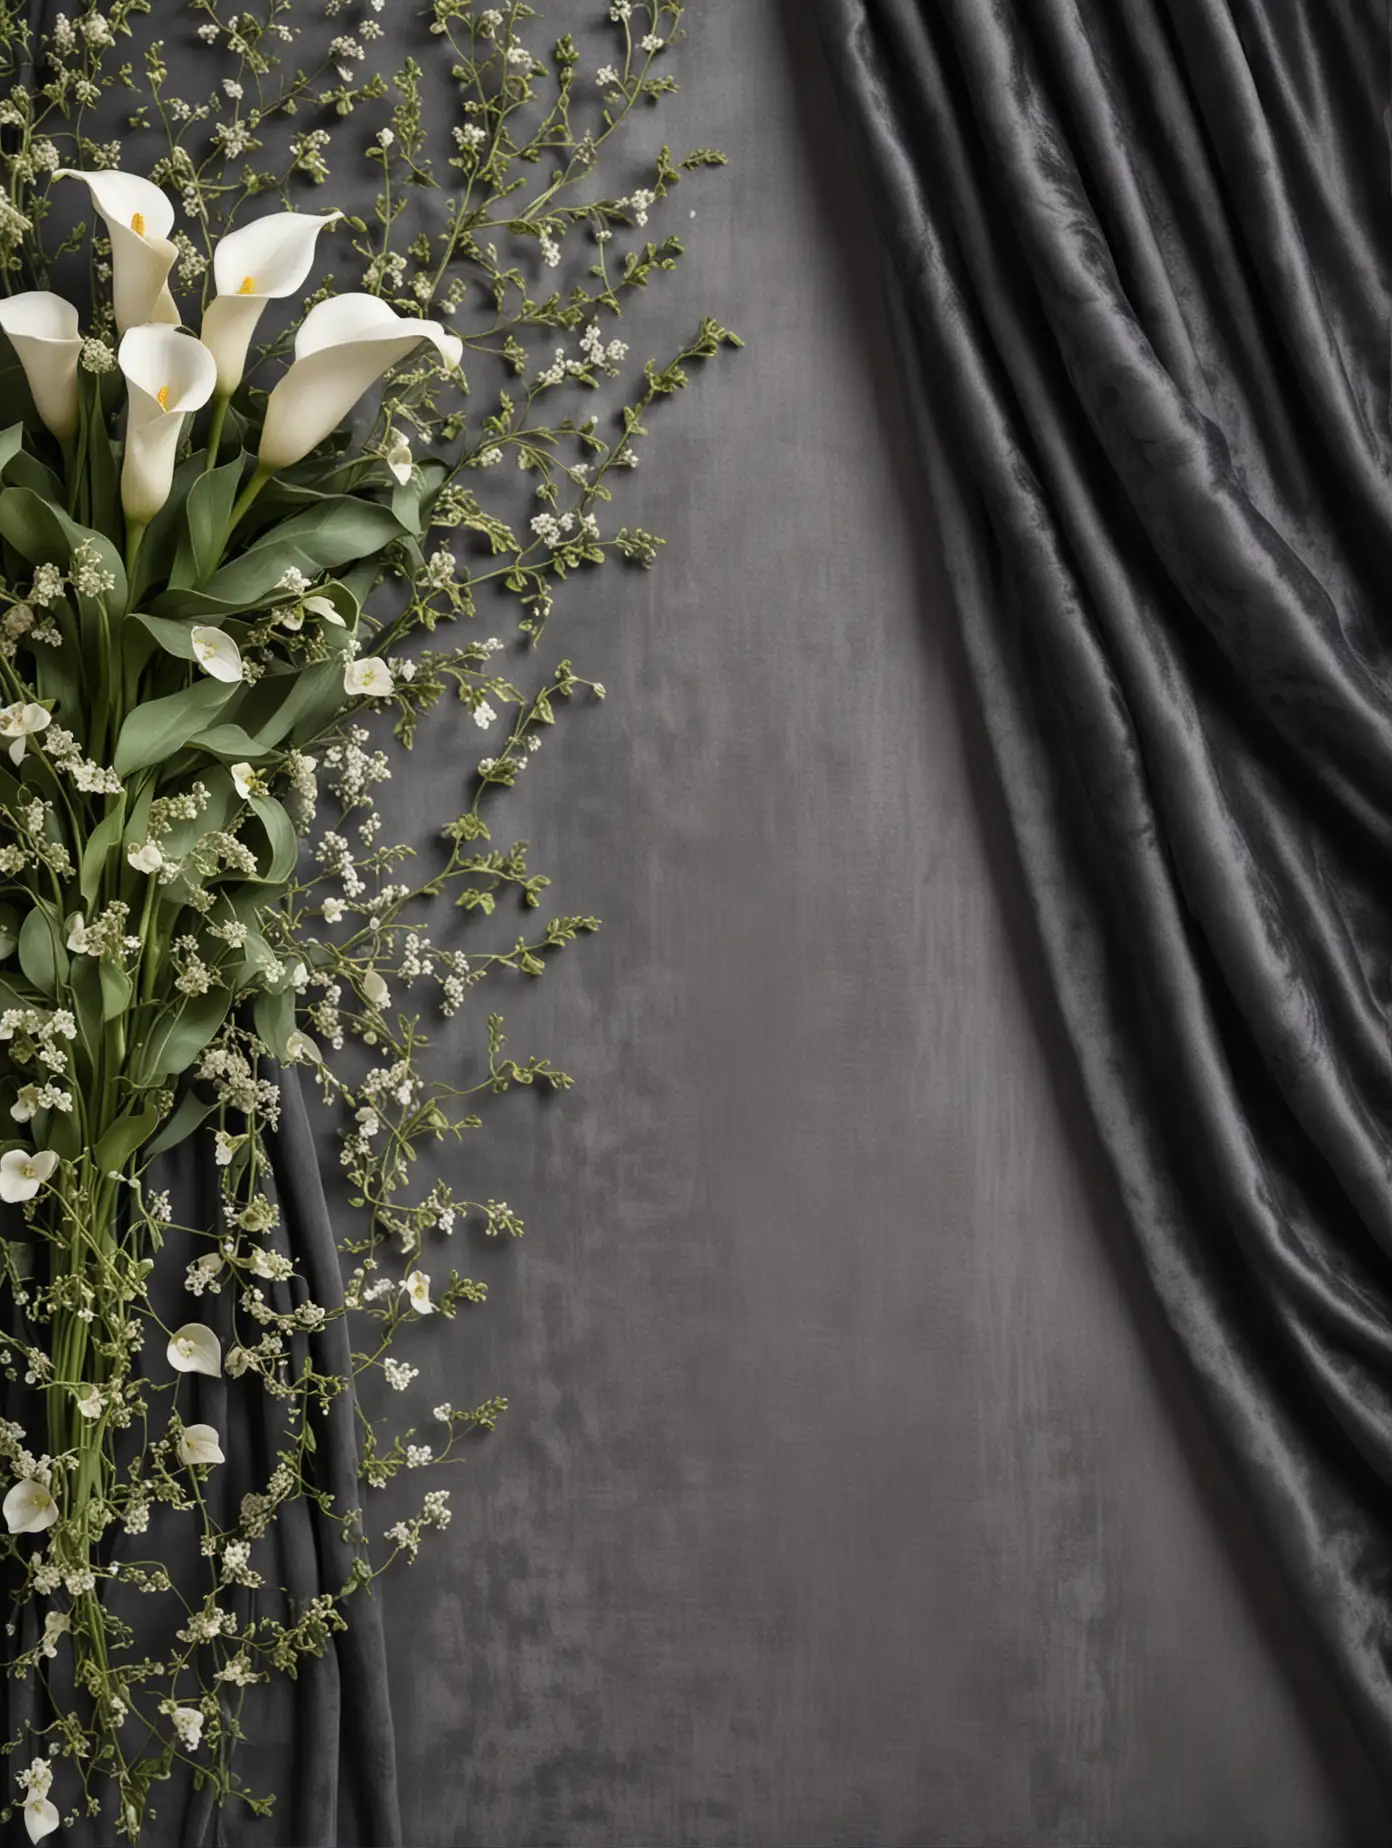 Modest border of swirling ivy, calla and gypsophila, background with draped velvet graphite fabric